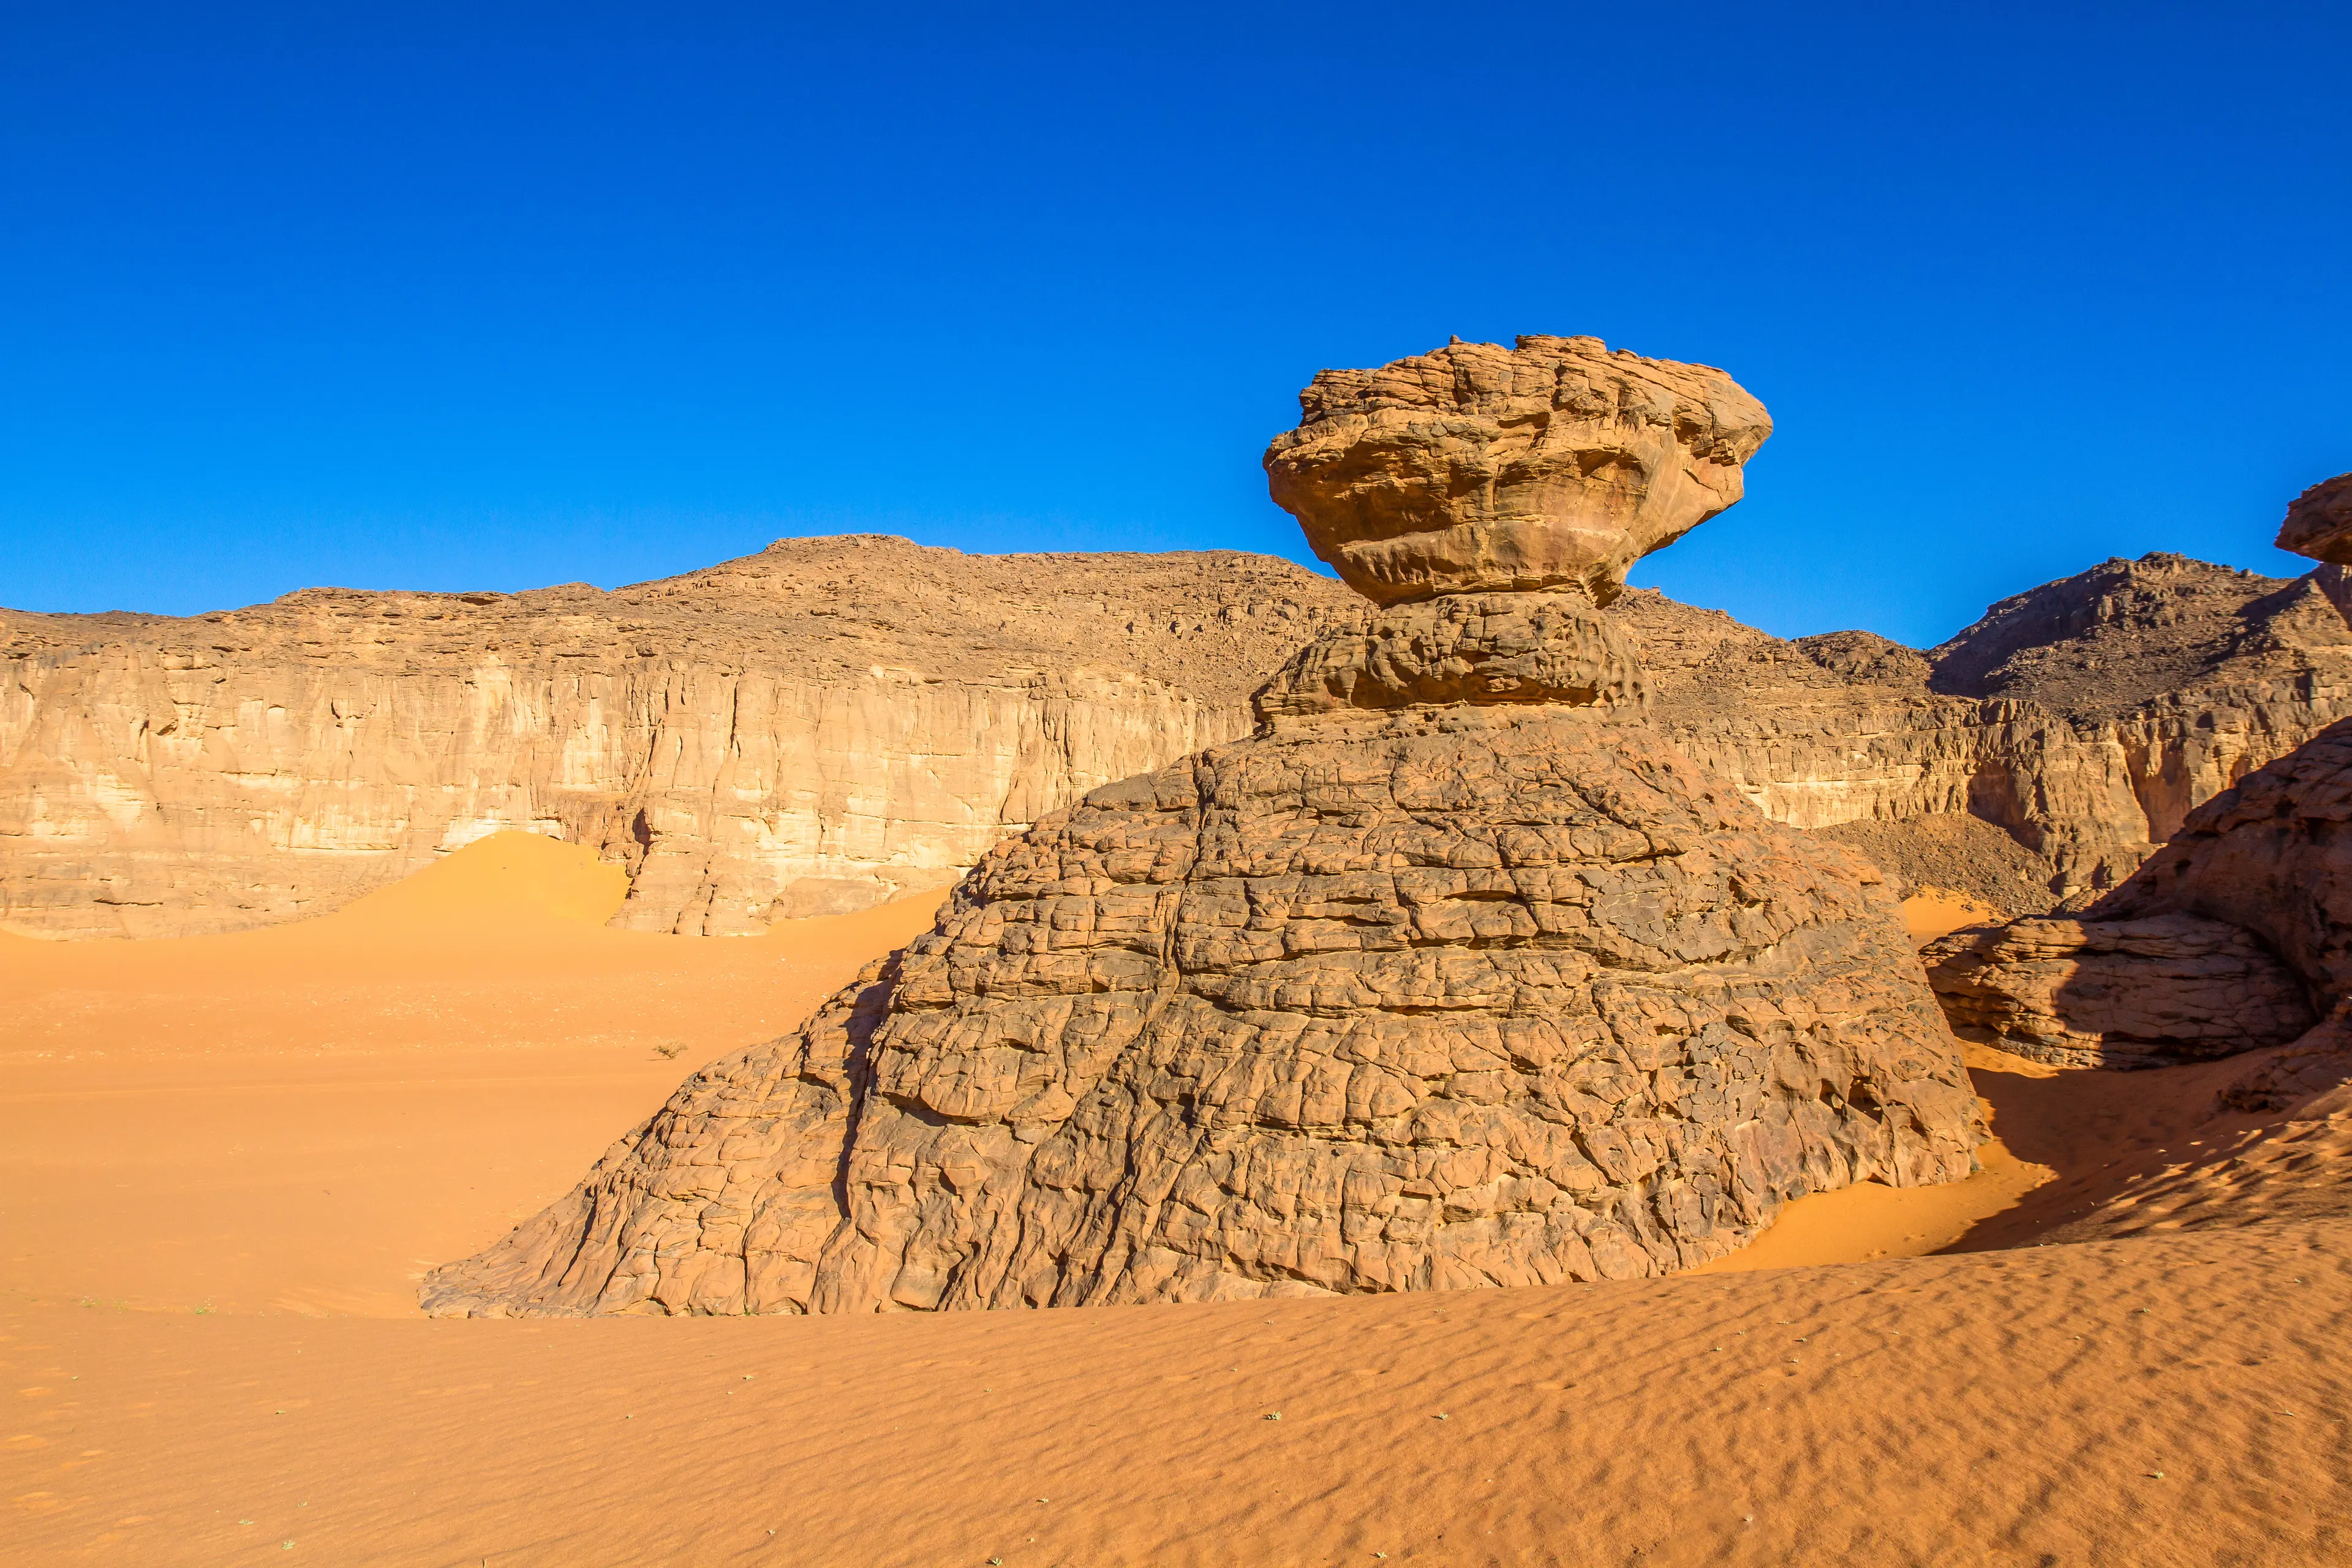 4-Day Sightseeing & Outdoors Expedition in Tassili n’Ajjer, Algeria